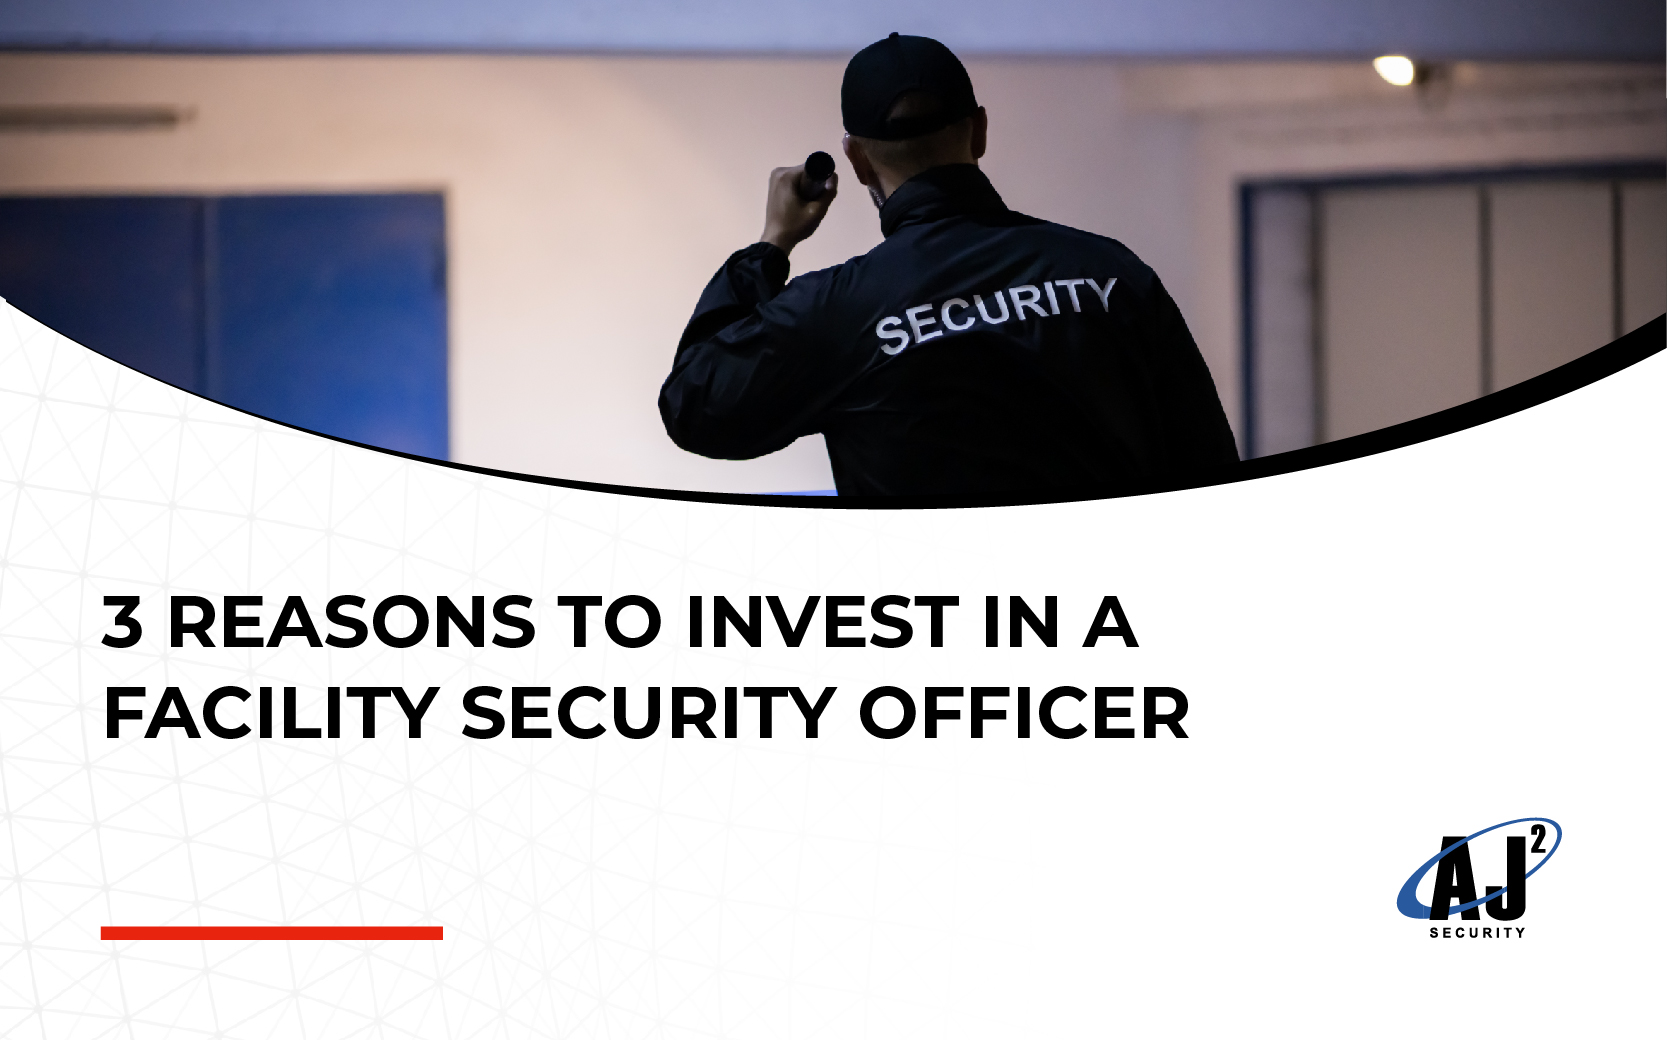 A dedicated facility security officer is one of the most effective investments any business owner could make. Learn why here with AJ Squared Security.